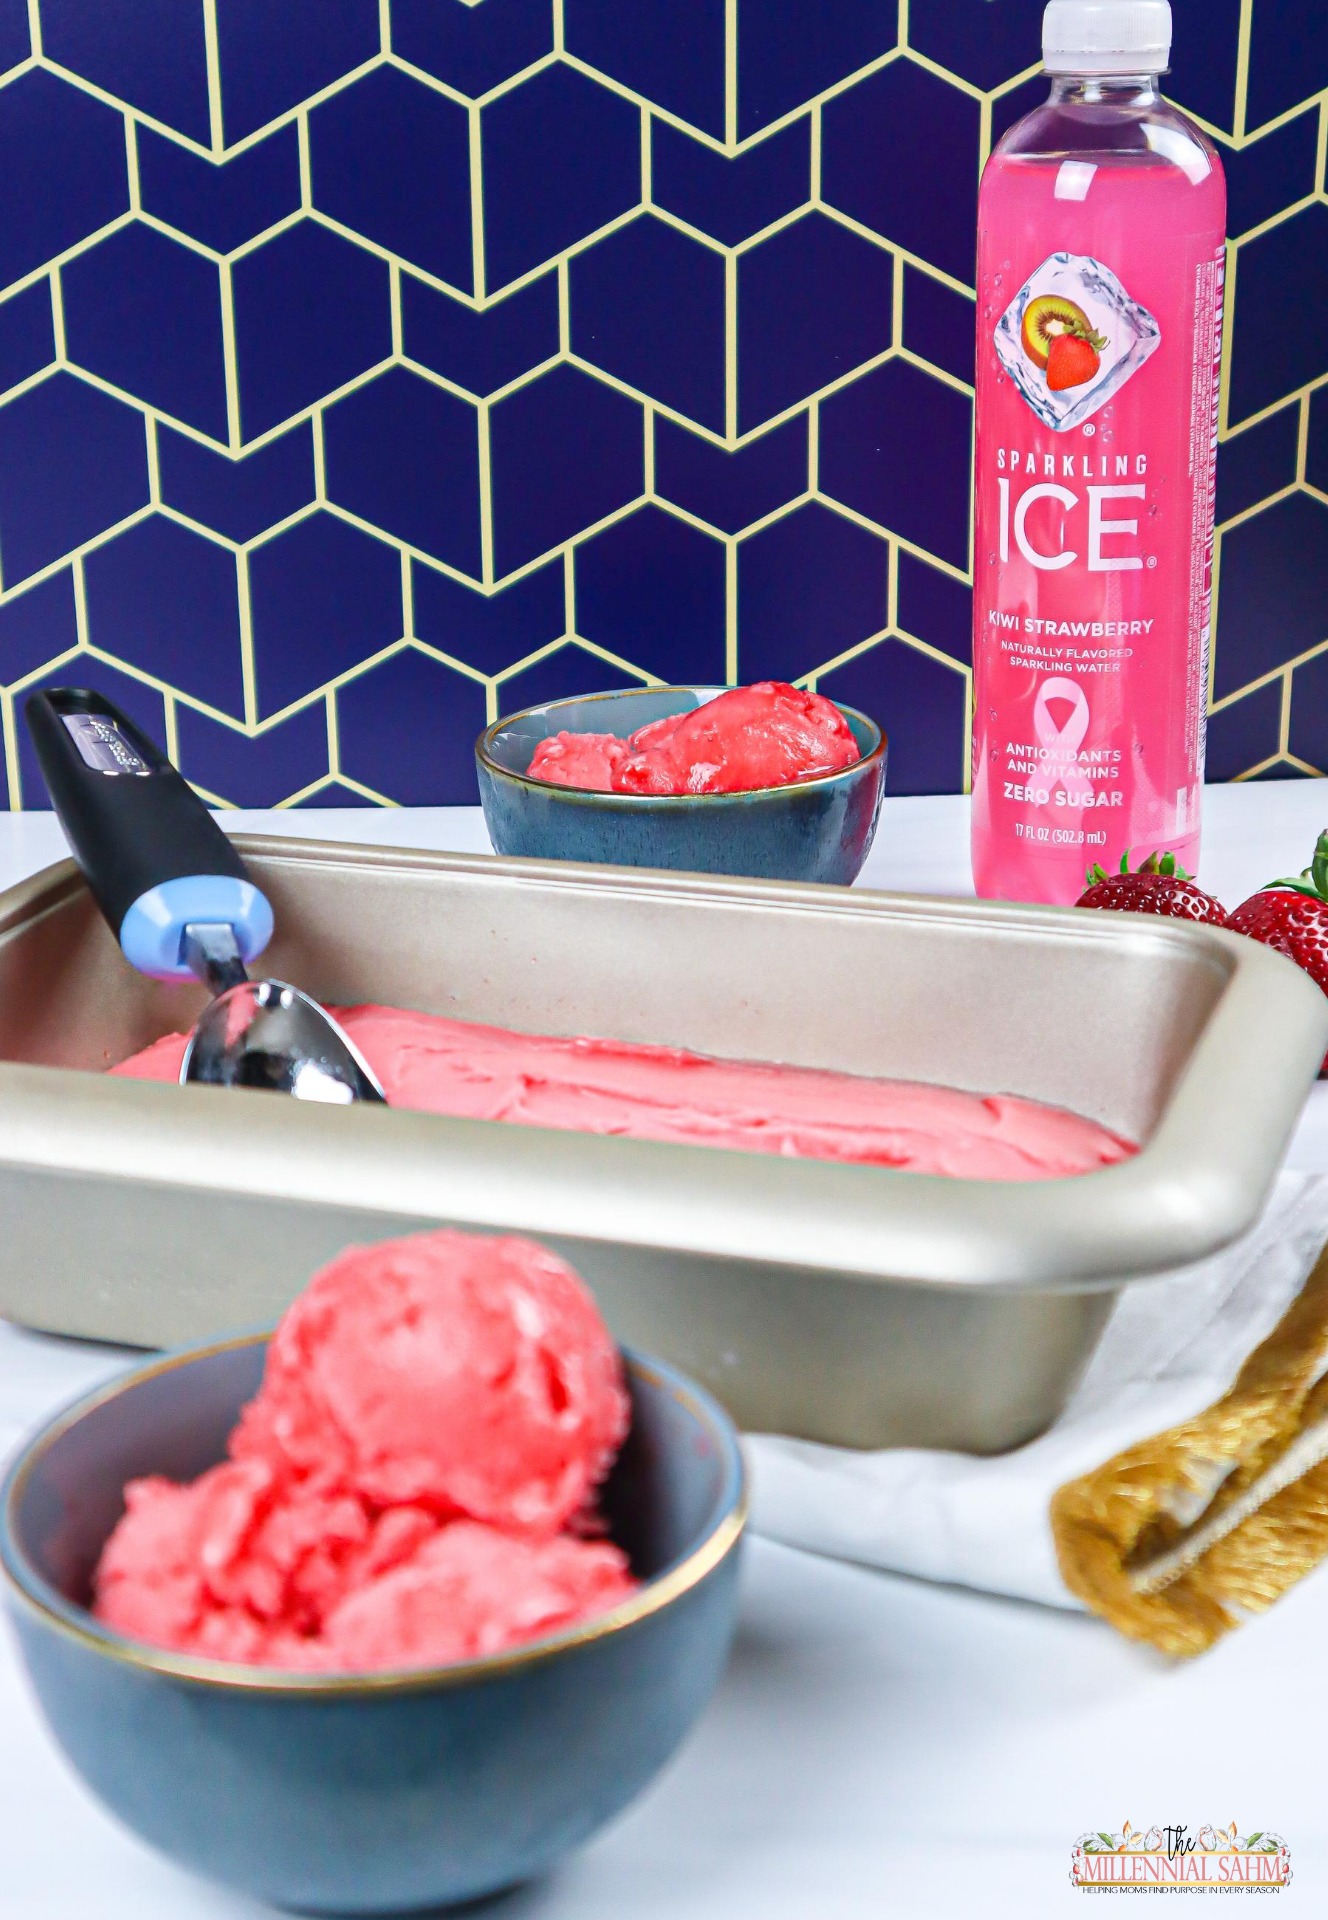 Looking for a guilt-free, sugar-free dessert to enjoy during these hot summer days? Look no further than this super easy Italian ice recipe featuring Sparkling Ice.